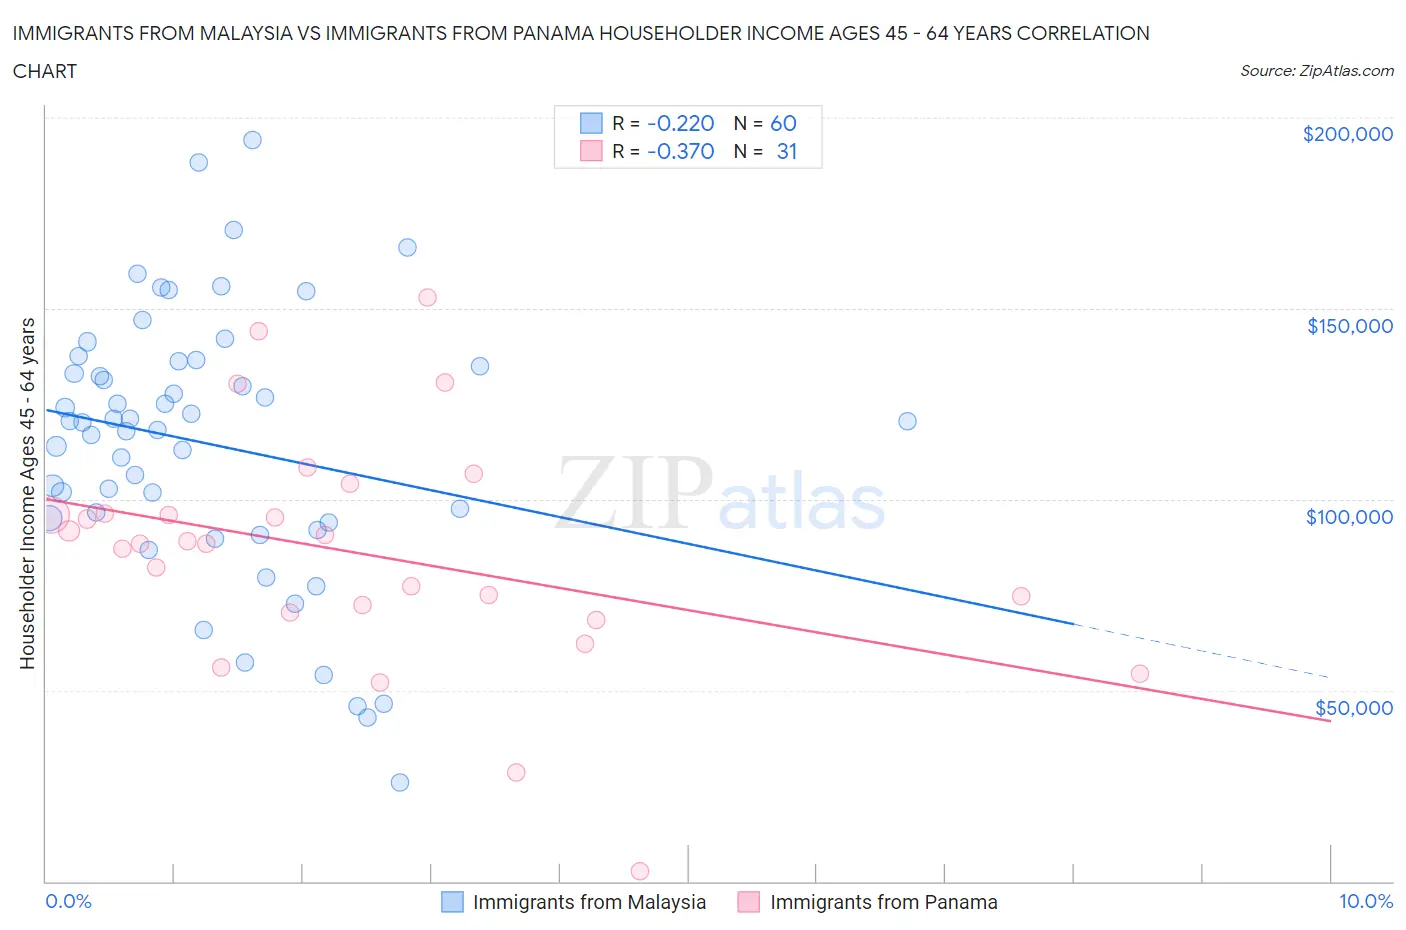 Immigrants from Malaysia vs Immigrants from Panama Householder Income Ages 45 - 64 years